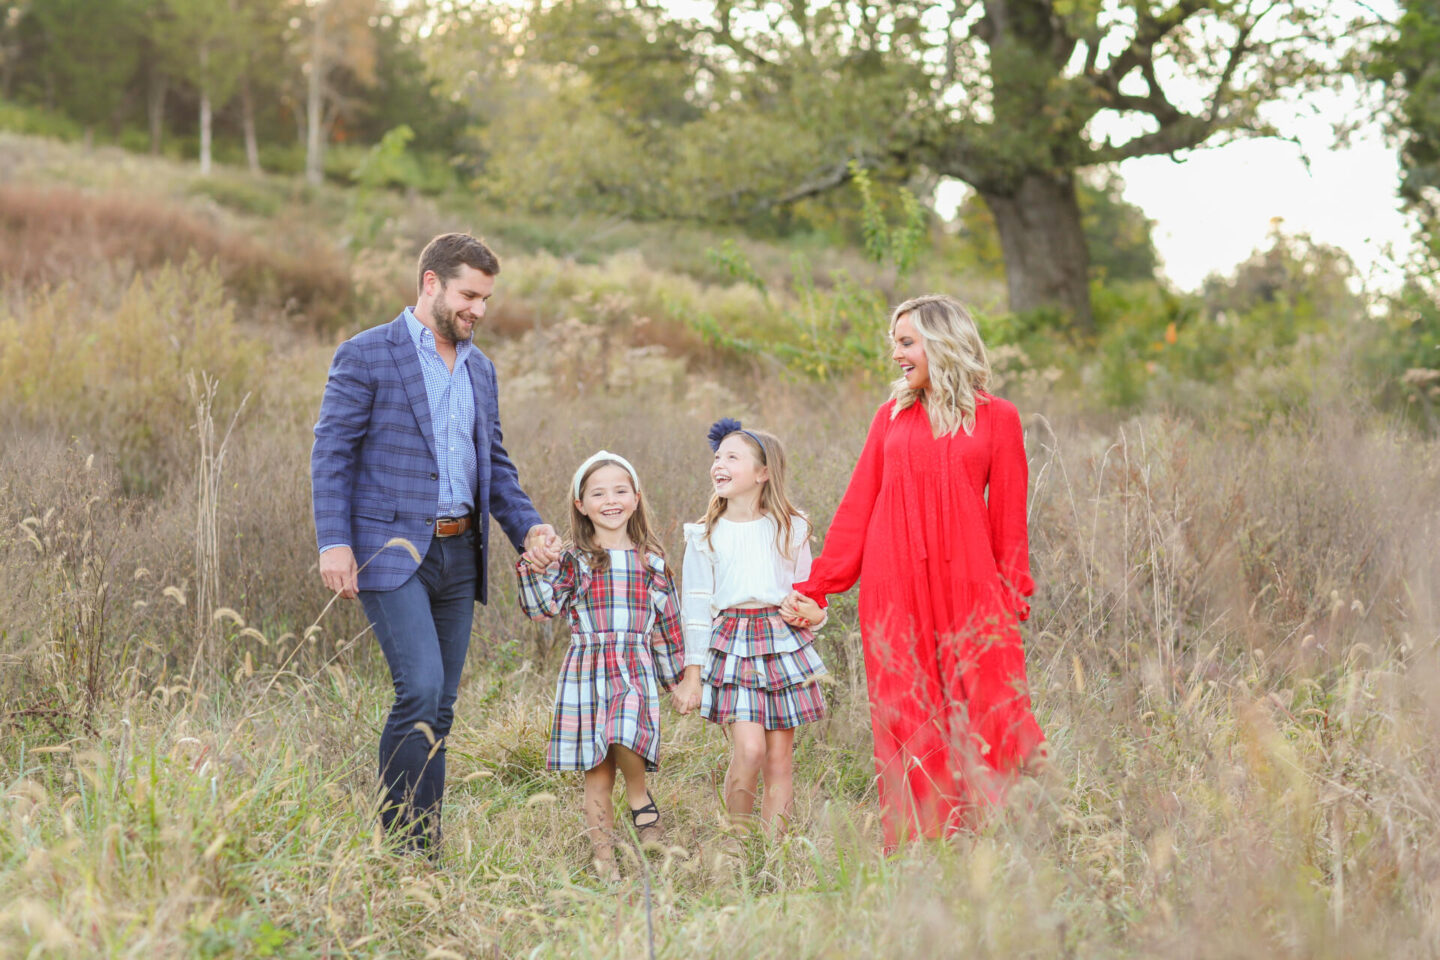 10 Year Wedding Anniversary by popular Nashville lifestyle blog, Hello Happiness: image of a mom and dad and their two daughters holding hand and walking together in a field. 